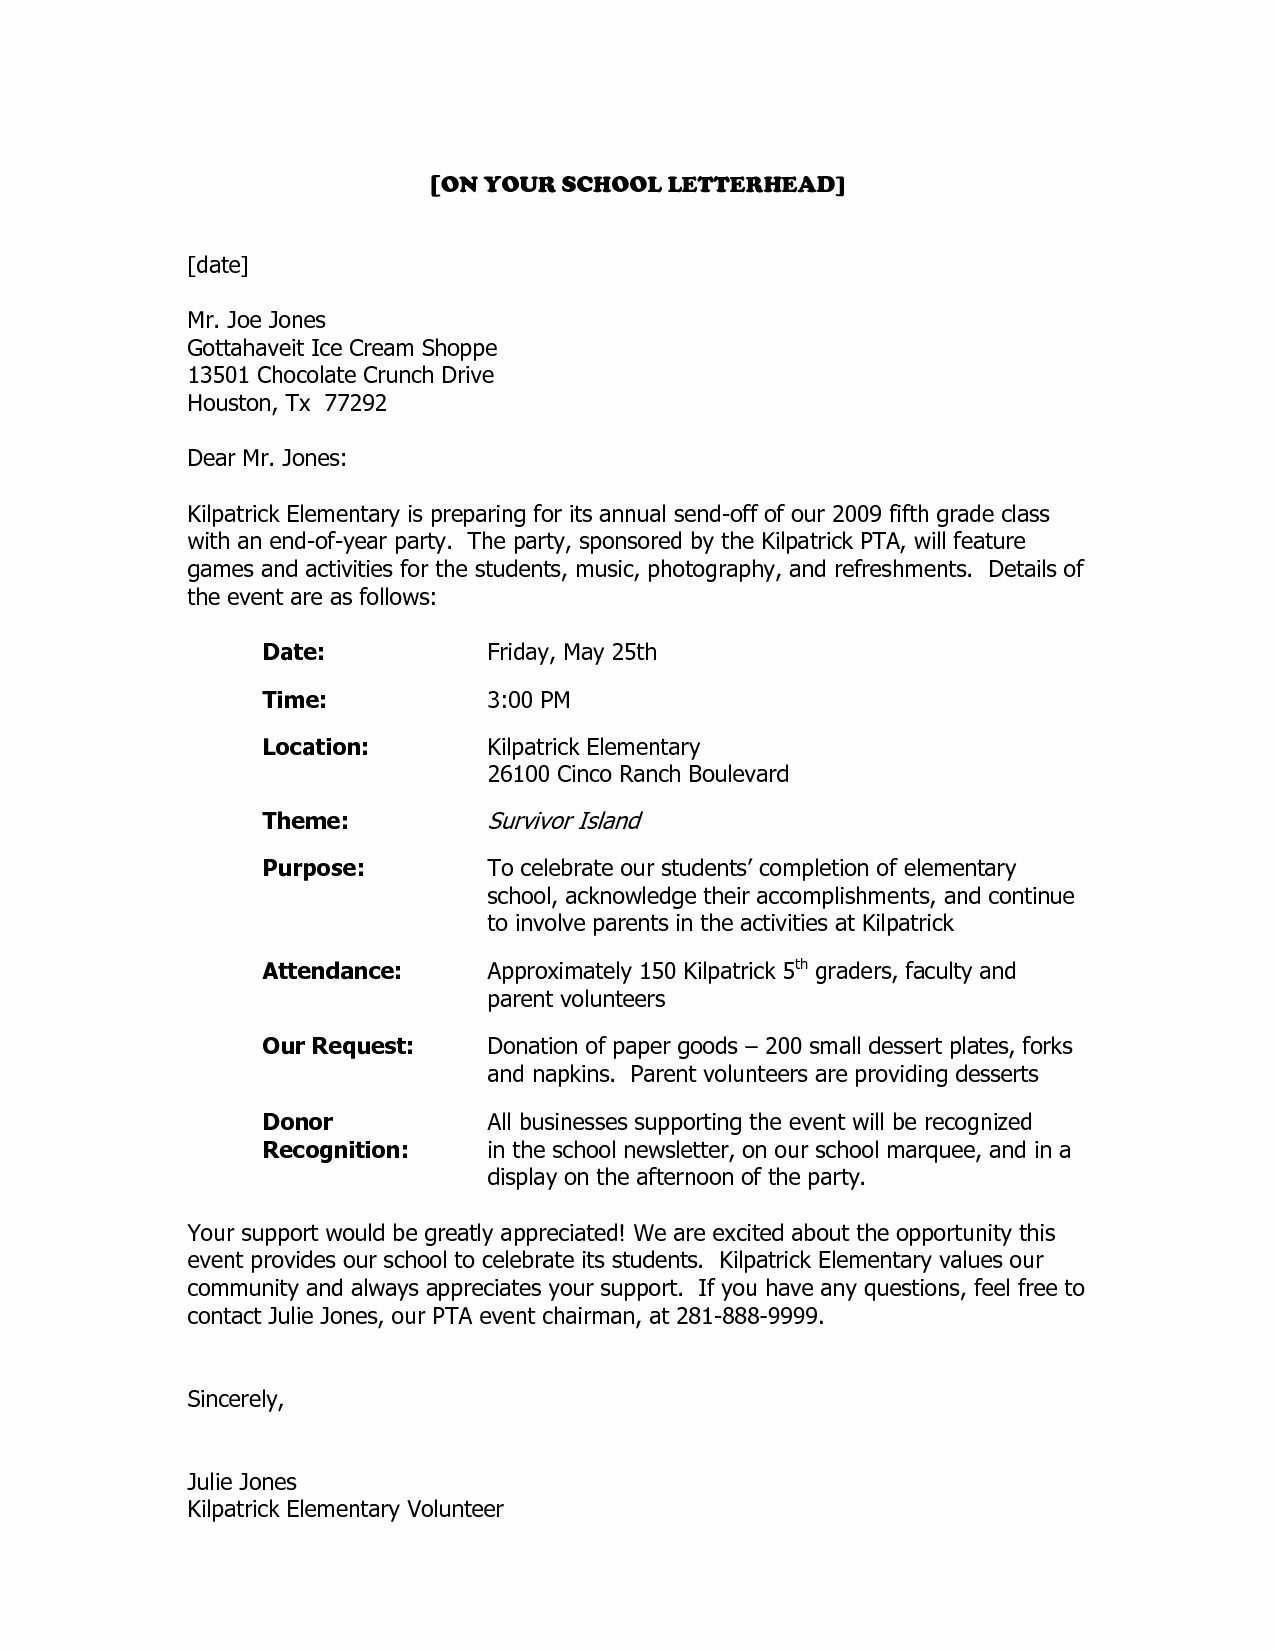 Sample Donation Request Letter New Sample Donation Request Letter for School